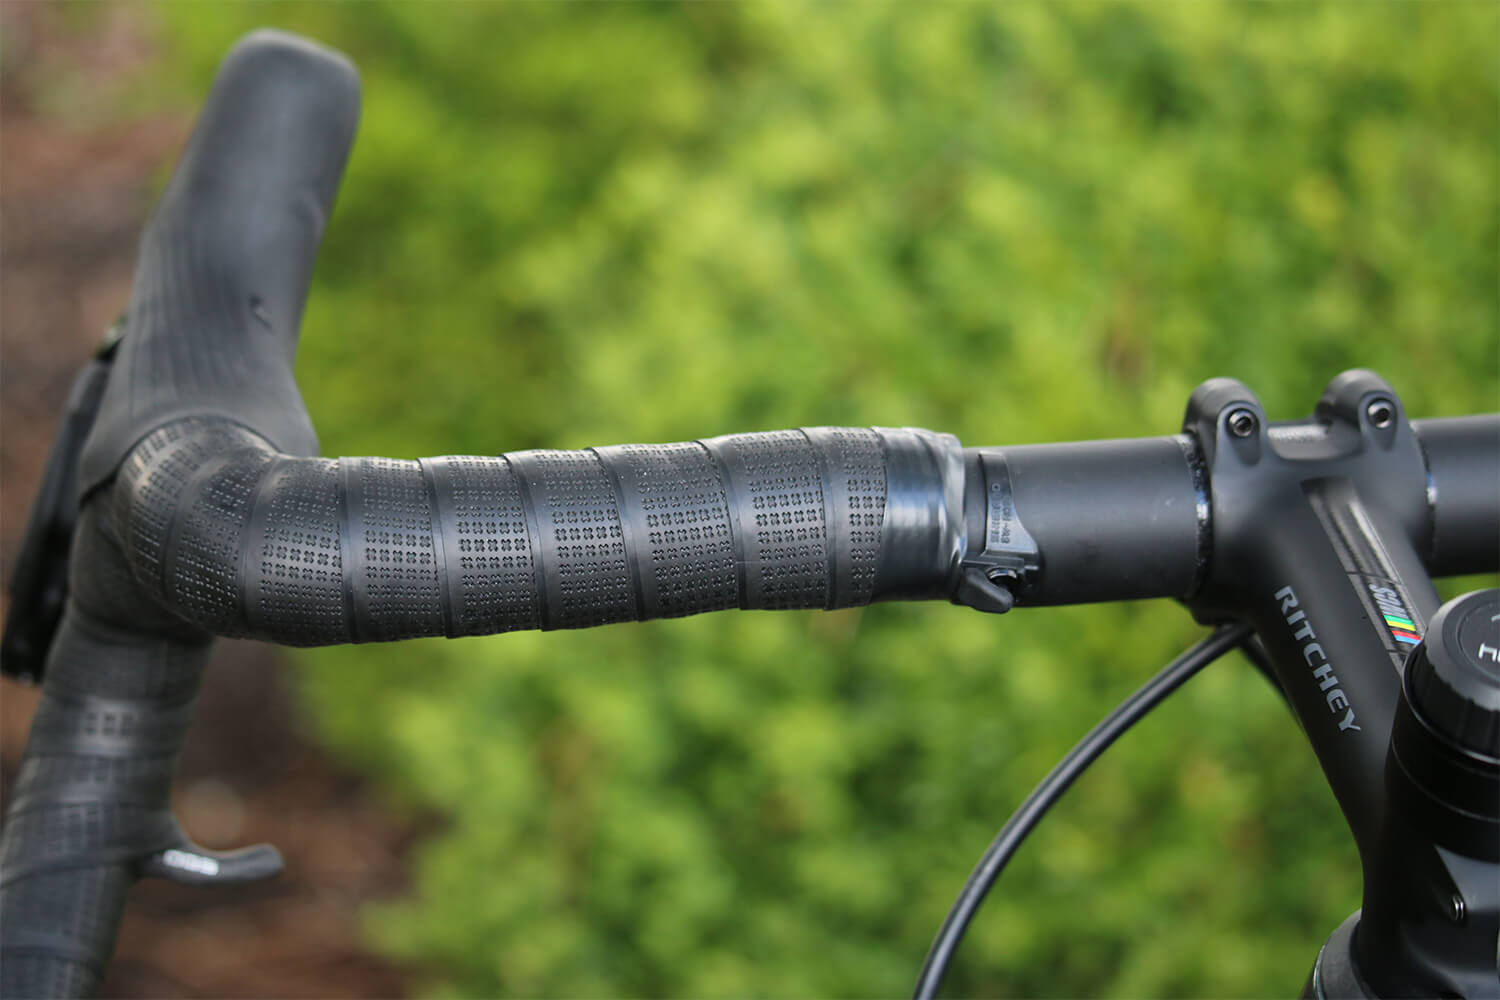 Classified Powershift Hub Contender Bicycles shifter detail